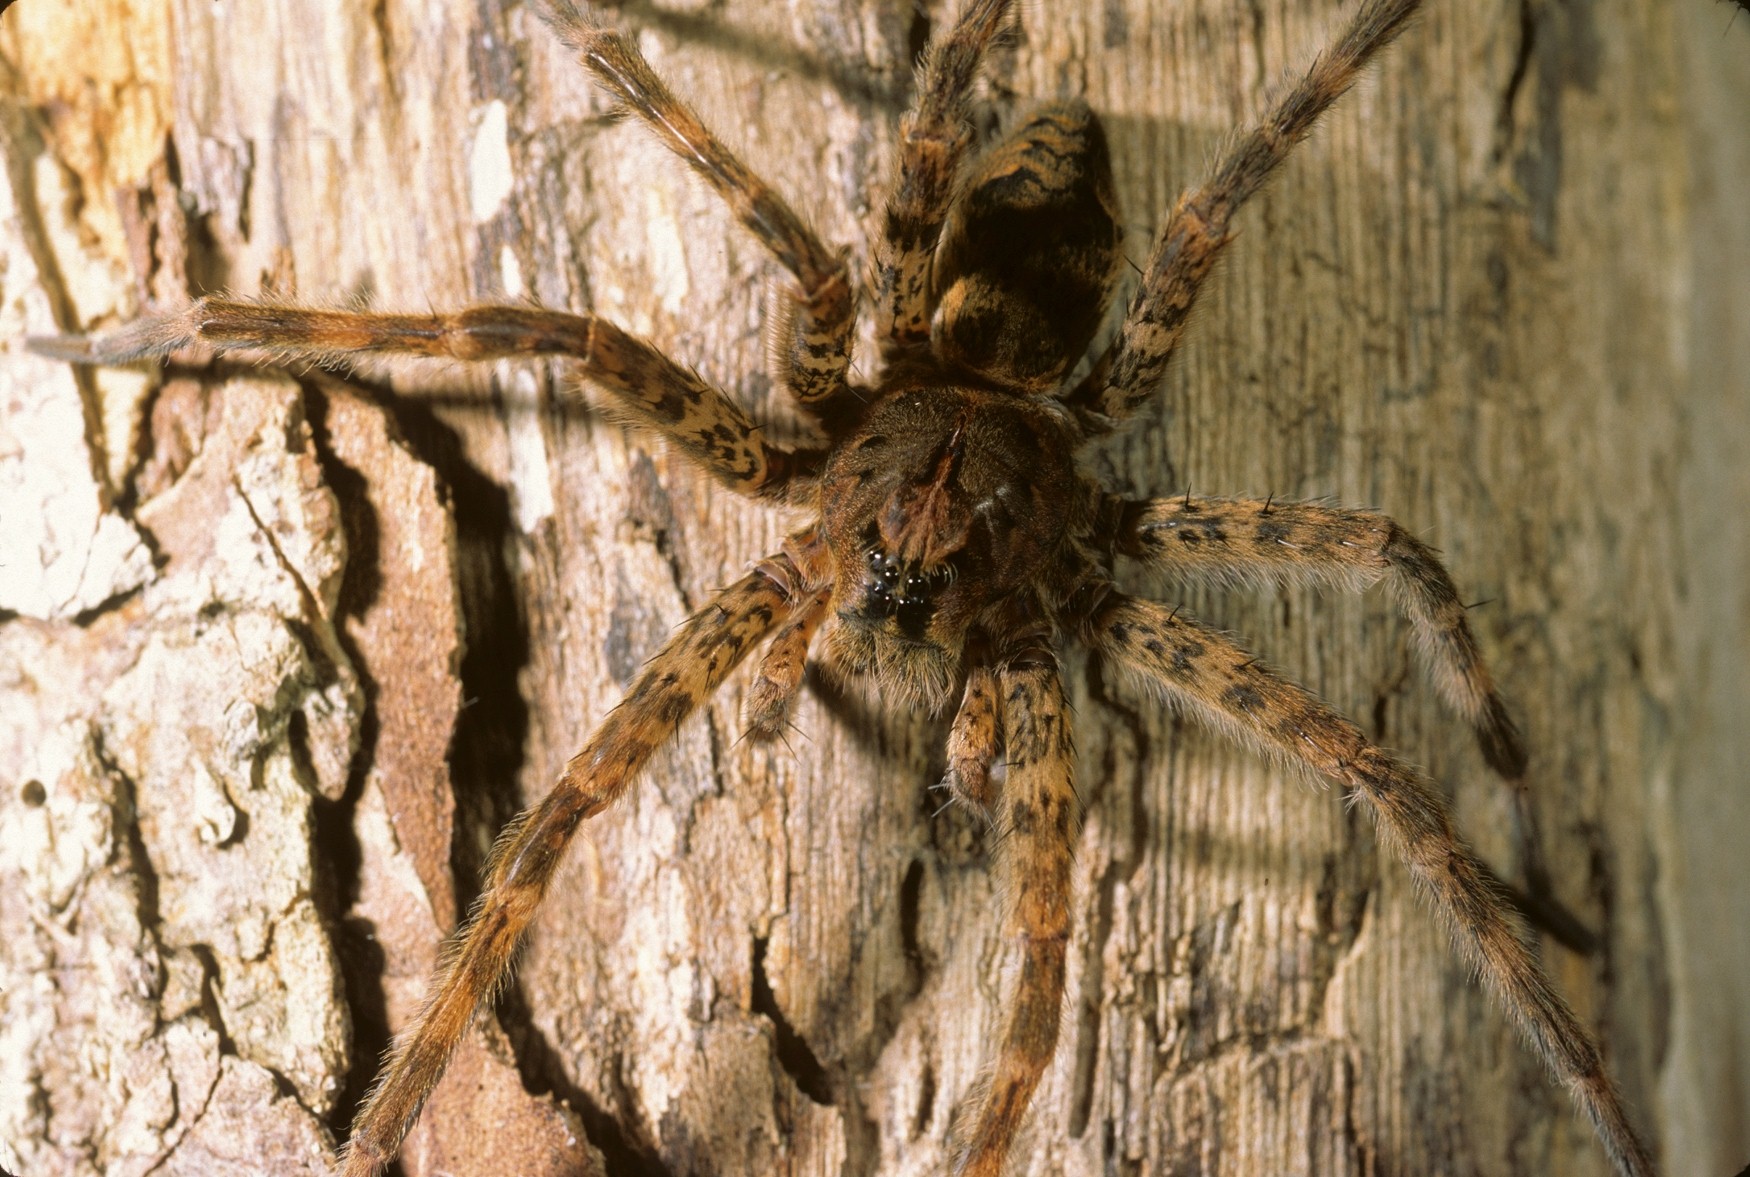 Nursery Web & Fishing Spiders - North American Insects & Spiders